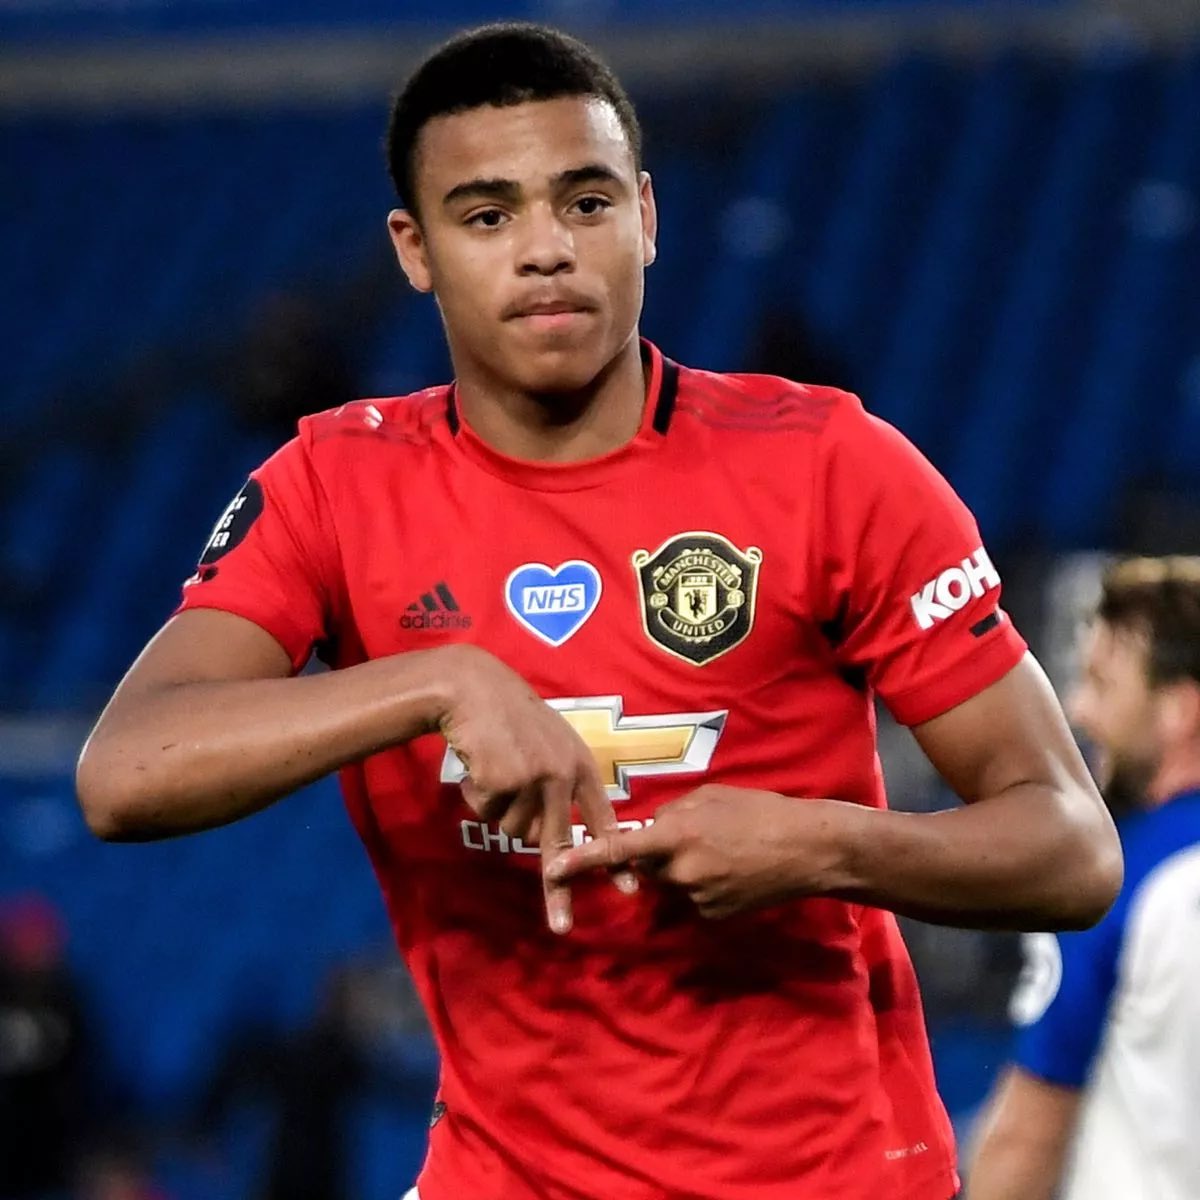 At least 2 Premier League clubs have enquired about signing 22-year old forward Mason Greenwood. Manchester United are thought to value Greenwood at around £40-45 million, similar to the fee that took Cole Palmer to Chelsea from Manchester City last summer. (Telegraph)